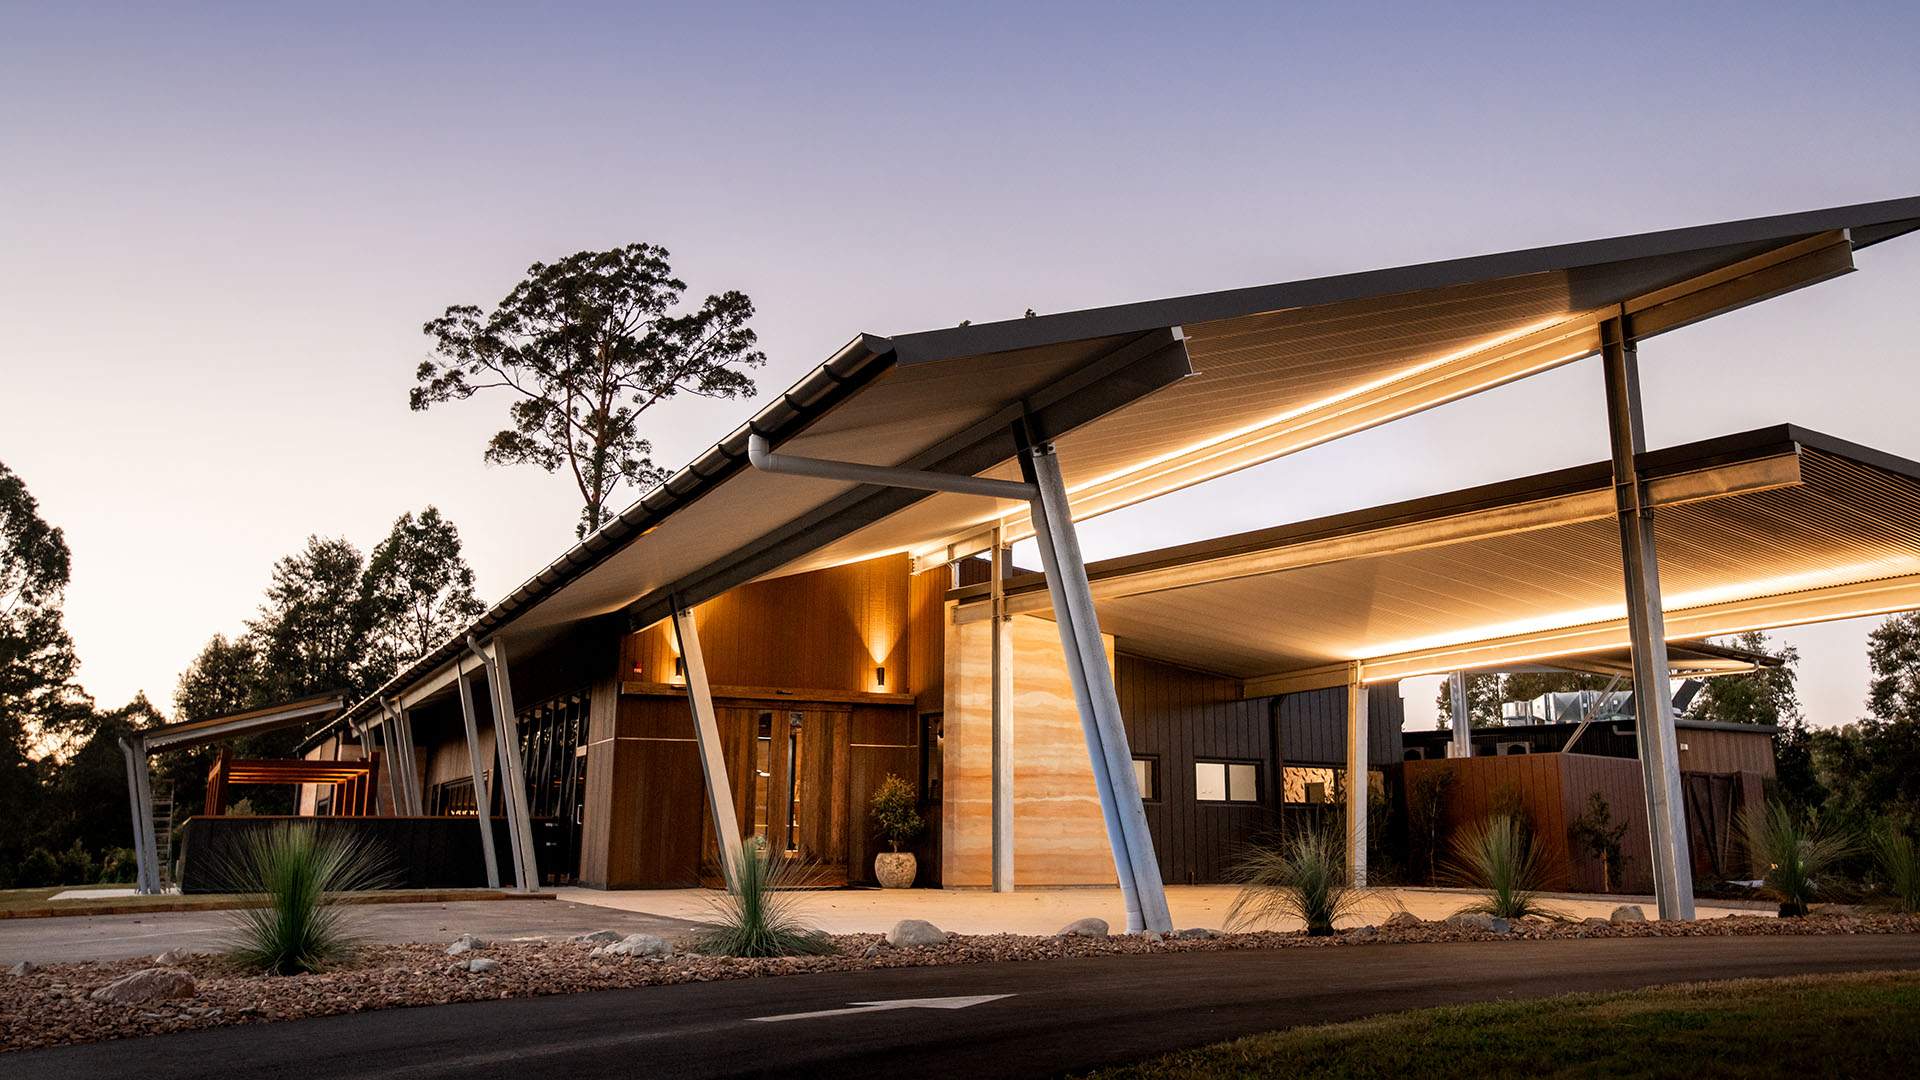 Australia Zoo Now Has Eight Cabins for Overnight Stays Among the Animals — Plus a Restaurant and Bar